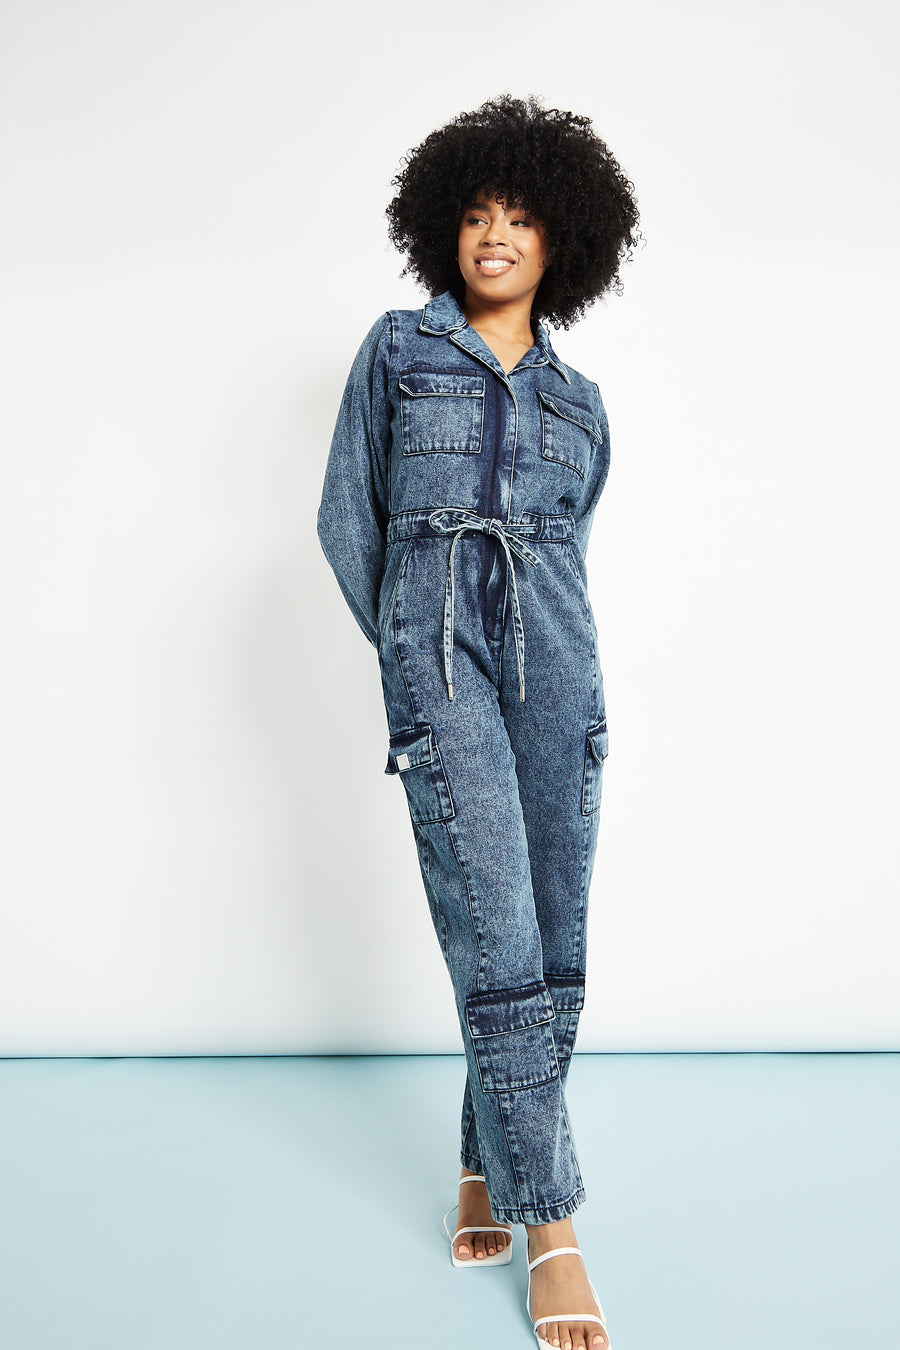 A Denim Jumpsuit with a French Twist - Jeans and a Teacup